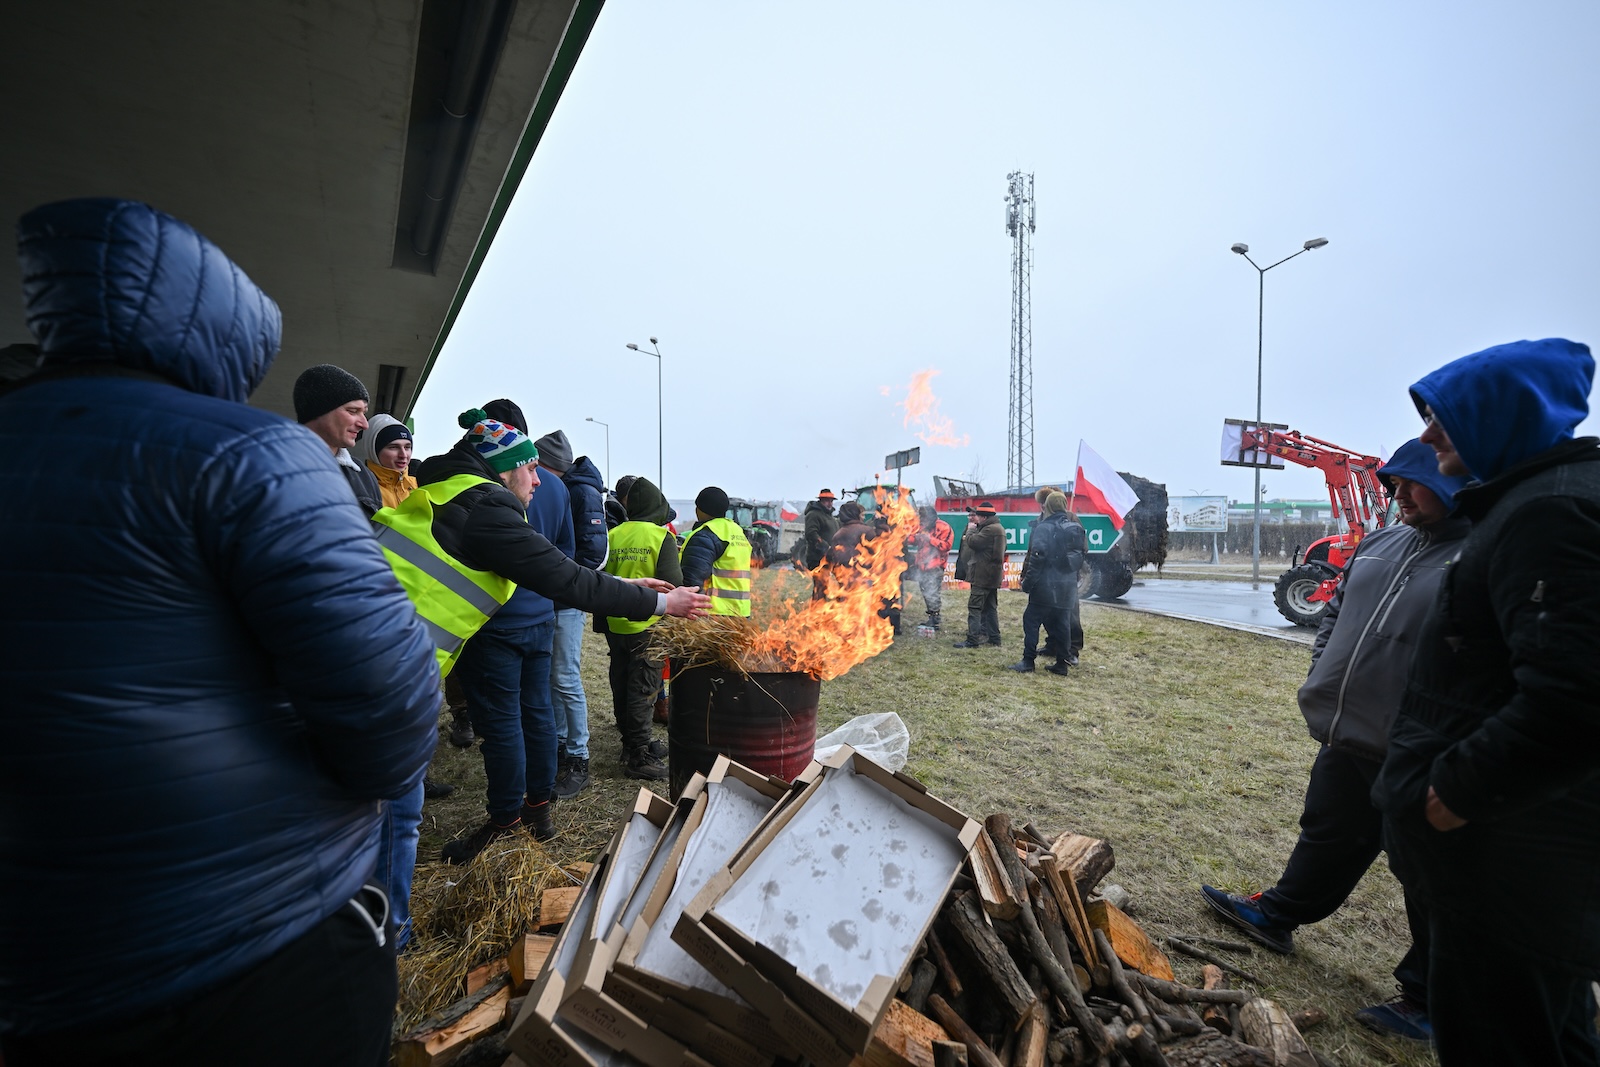 epa11139576 Polish farmers light a fire and block traffic during a protest in Stojadla village, east-central Poland, 09 February 2024. Polish farmers announced a nationwide protest on 09 February against the European Green Deal and the influx of goods coming from Ukraine, expected to last for 30 days.The protest was sparked by the recent decision by the European Commission to extend the duty-free trade with Ukraine until 2025. Farm vehicles, such as tractors, as well as pedestrians blocked roads in different parts of the country.  EPA/PRZEMYSLAW PIATKOWSKI POLAND OUT